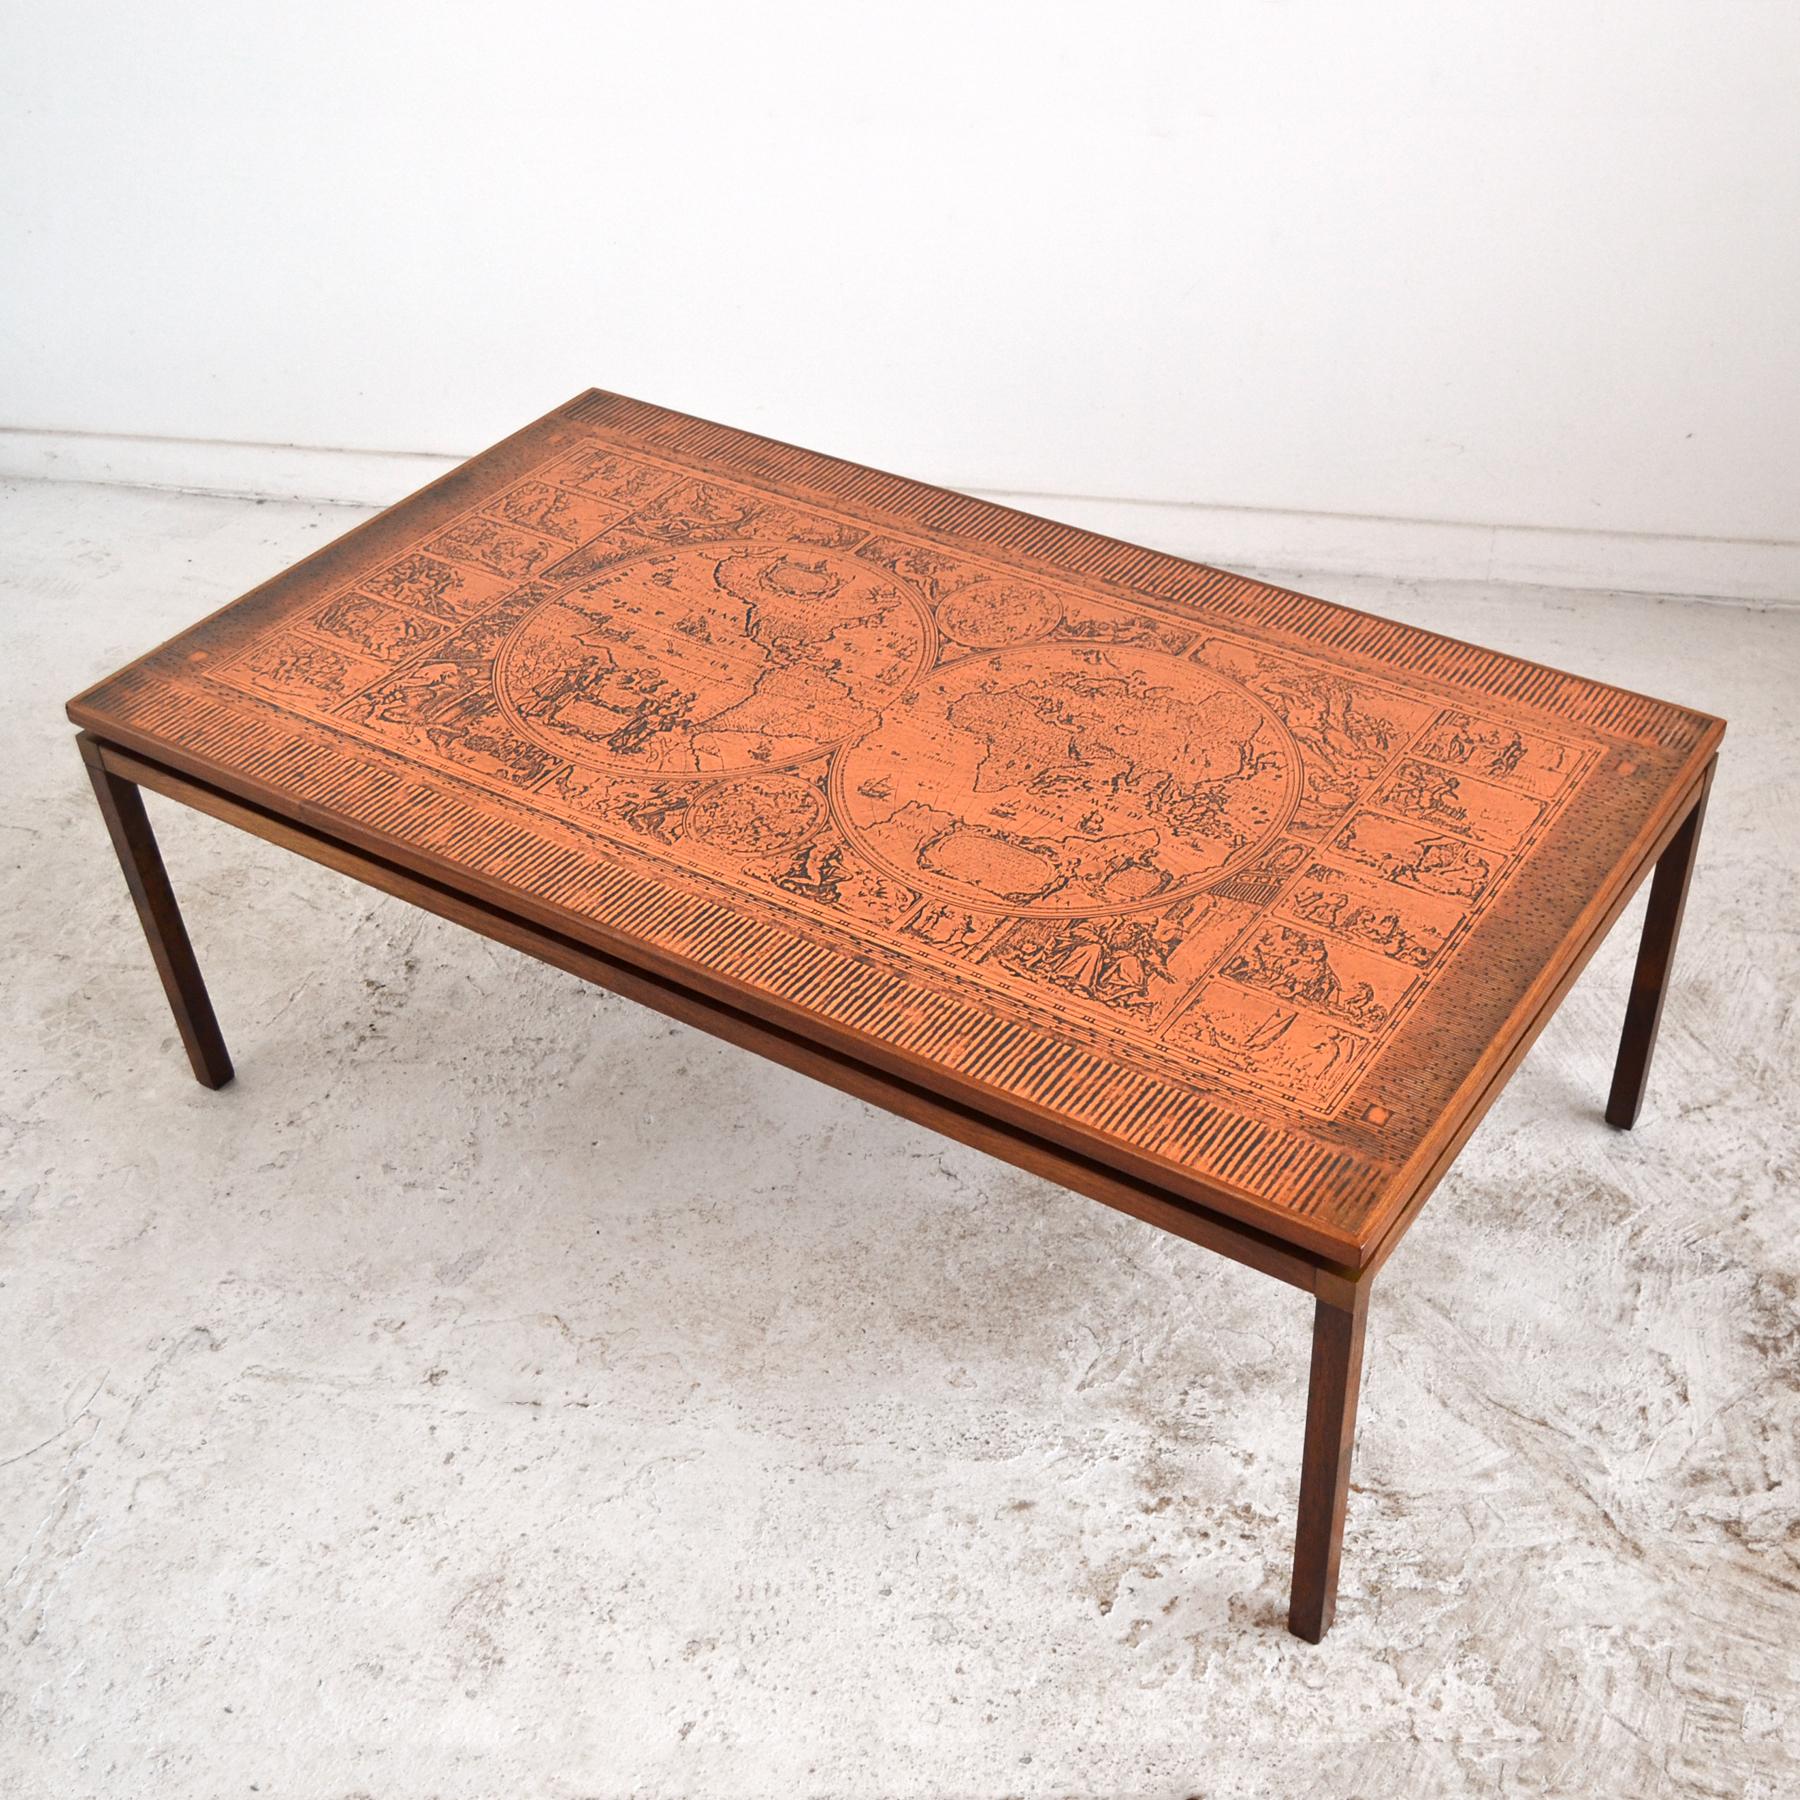 This compelling and uncommon large coffee table has a very subtle form and construction details. The rosewood base supports a copper covered top with etched antique global map imagery.